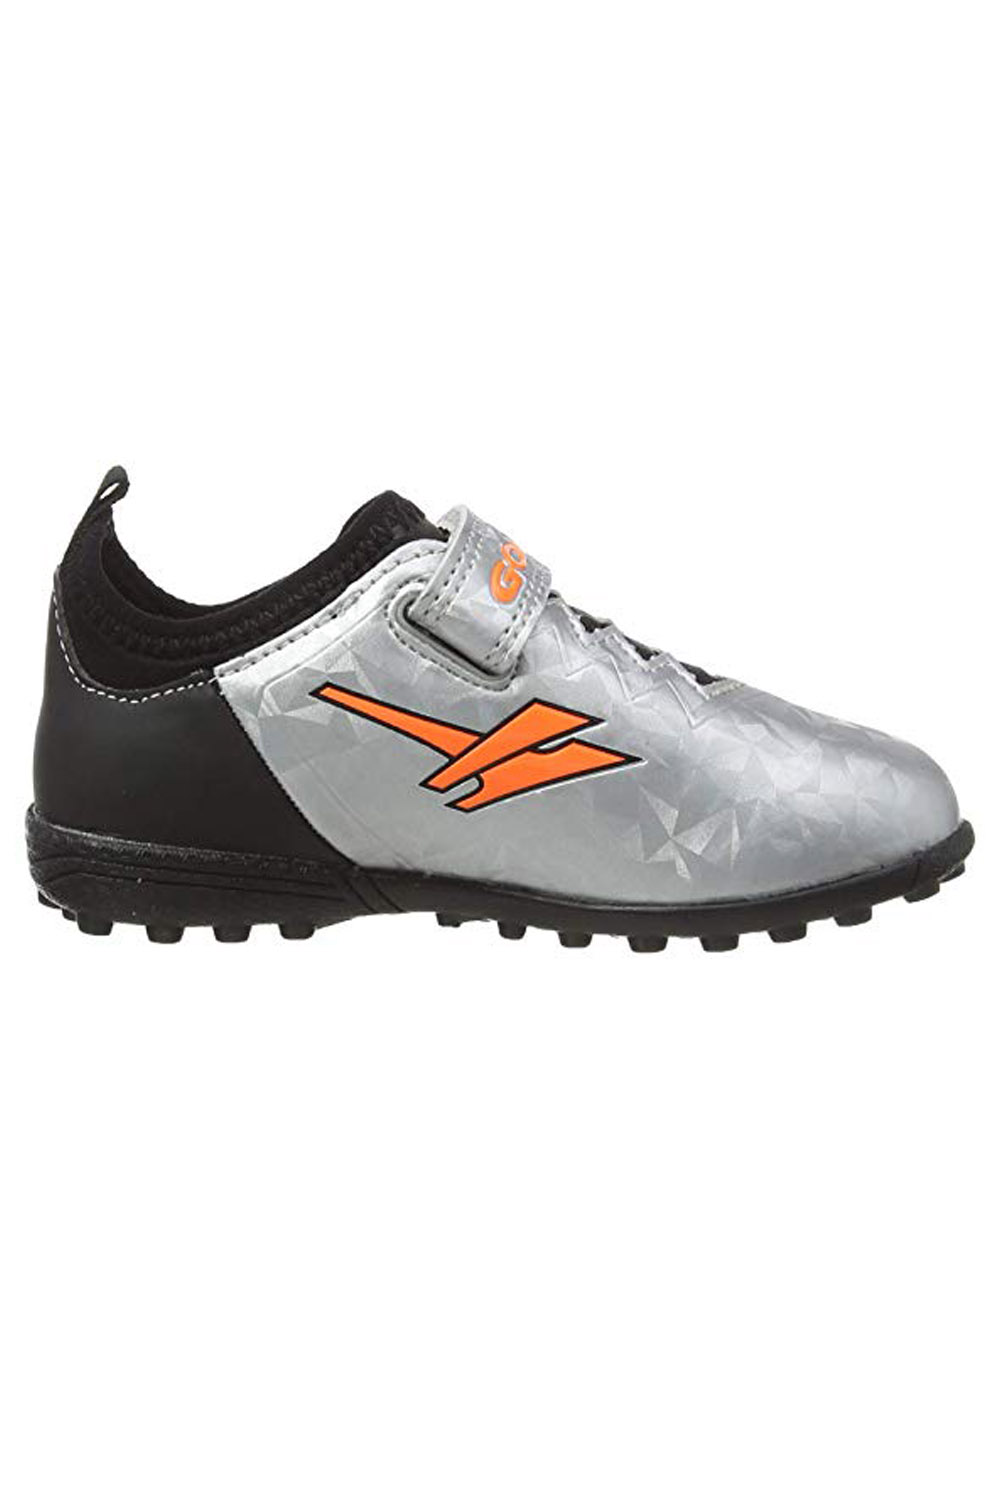 moulded boots astro turf